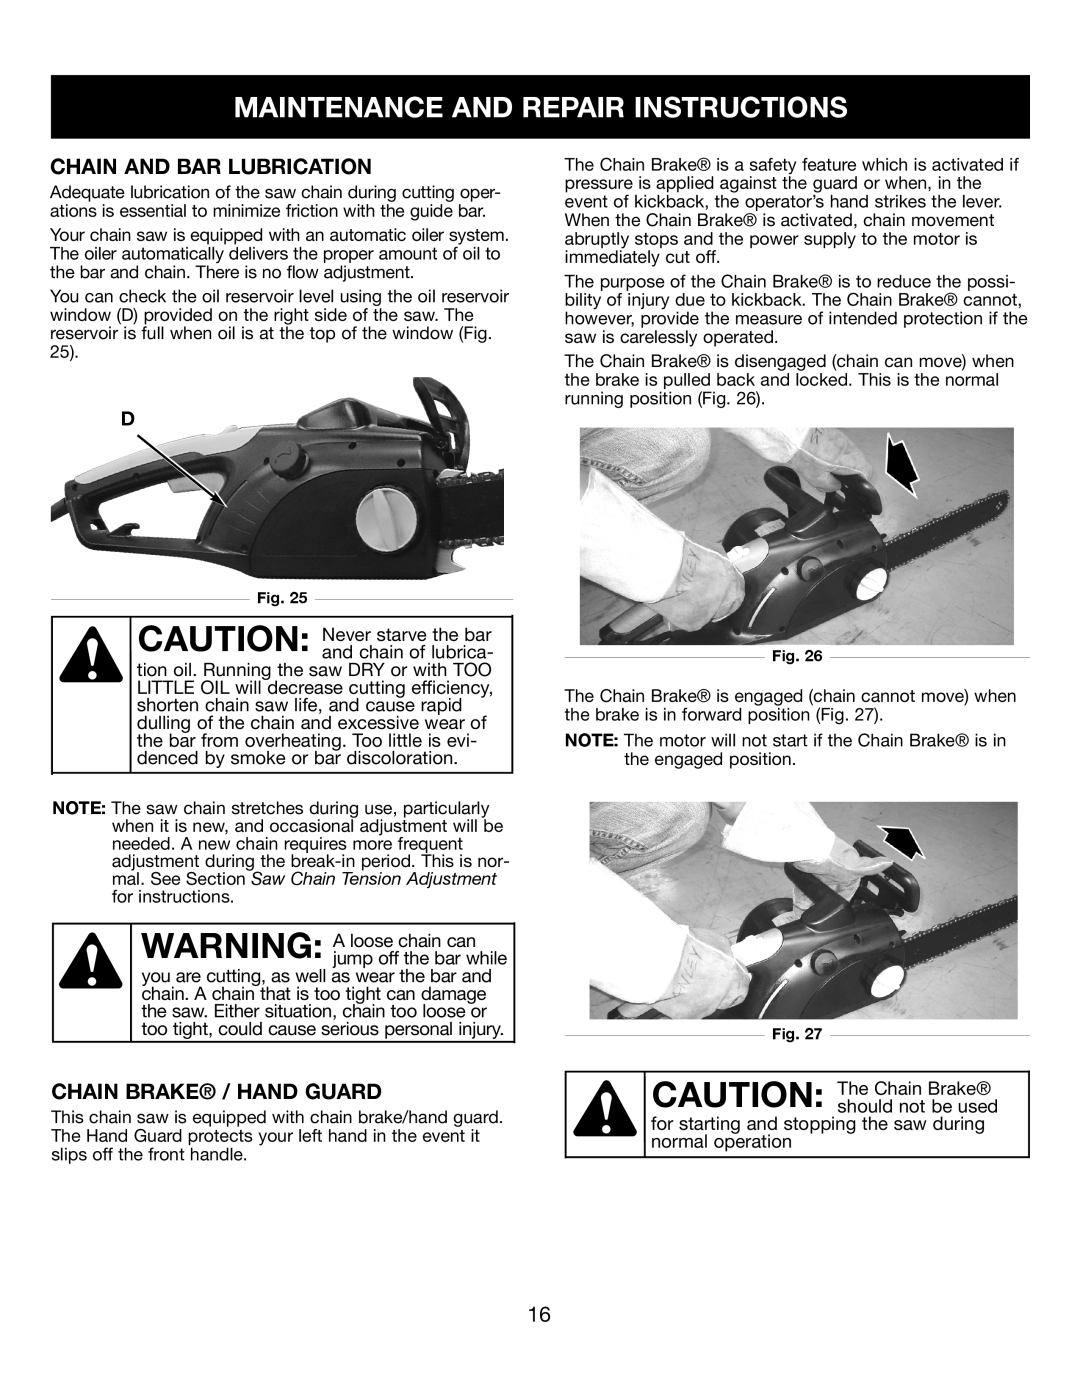 Craftsman 316.34107 manual Chain And Bar Lubrication, Chain Brake / Hand Guard, Maintenance And Repair Instructions 